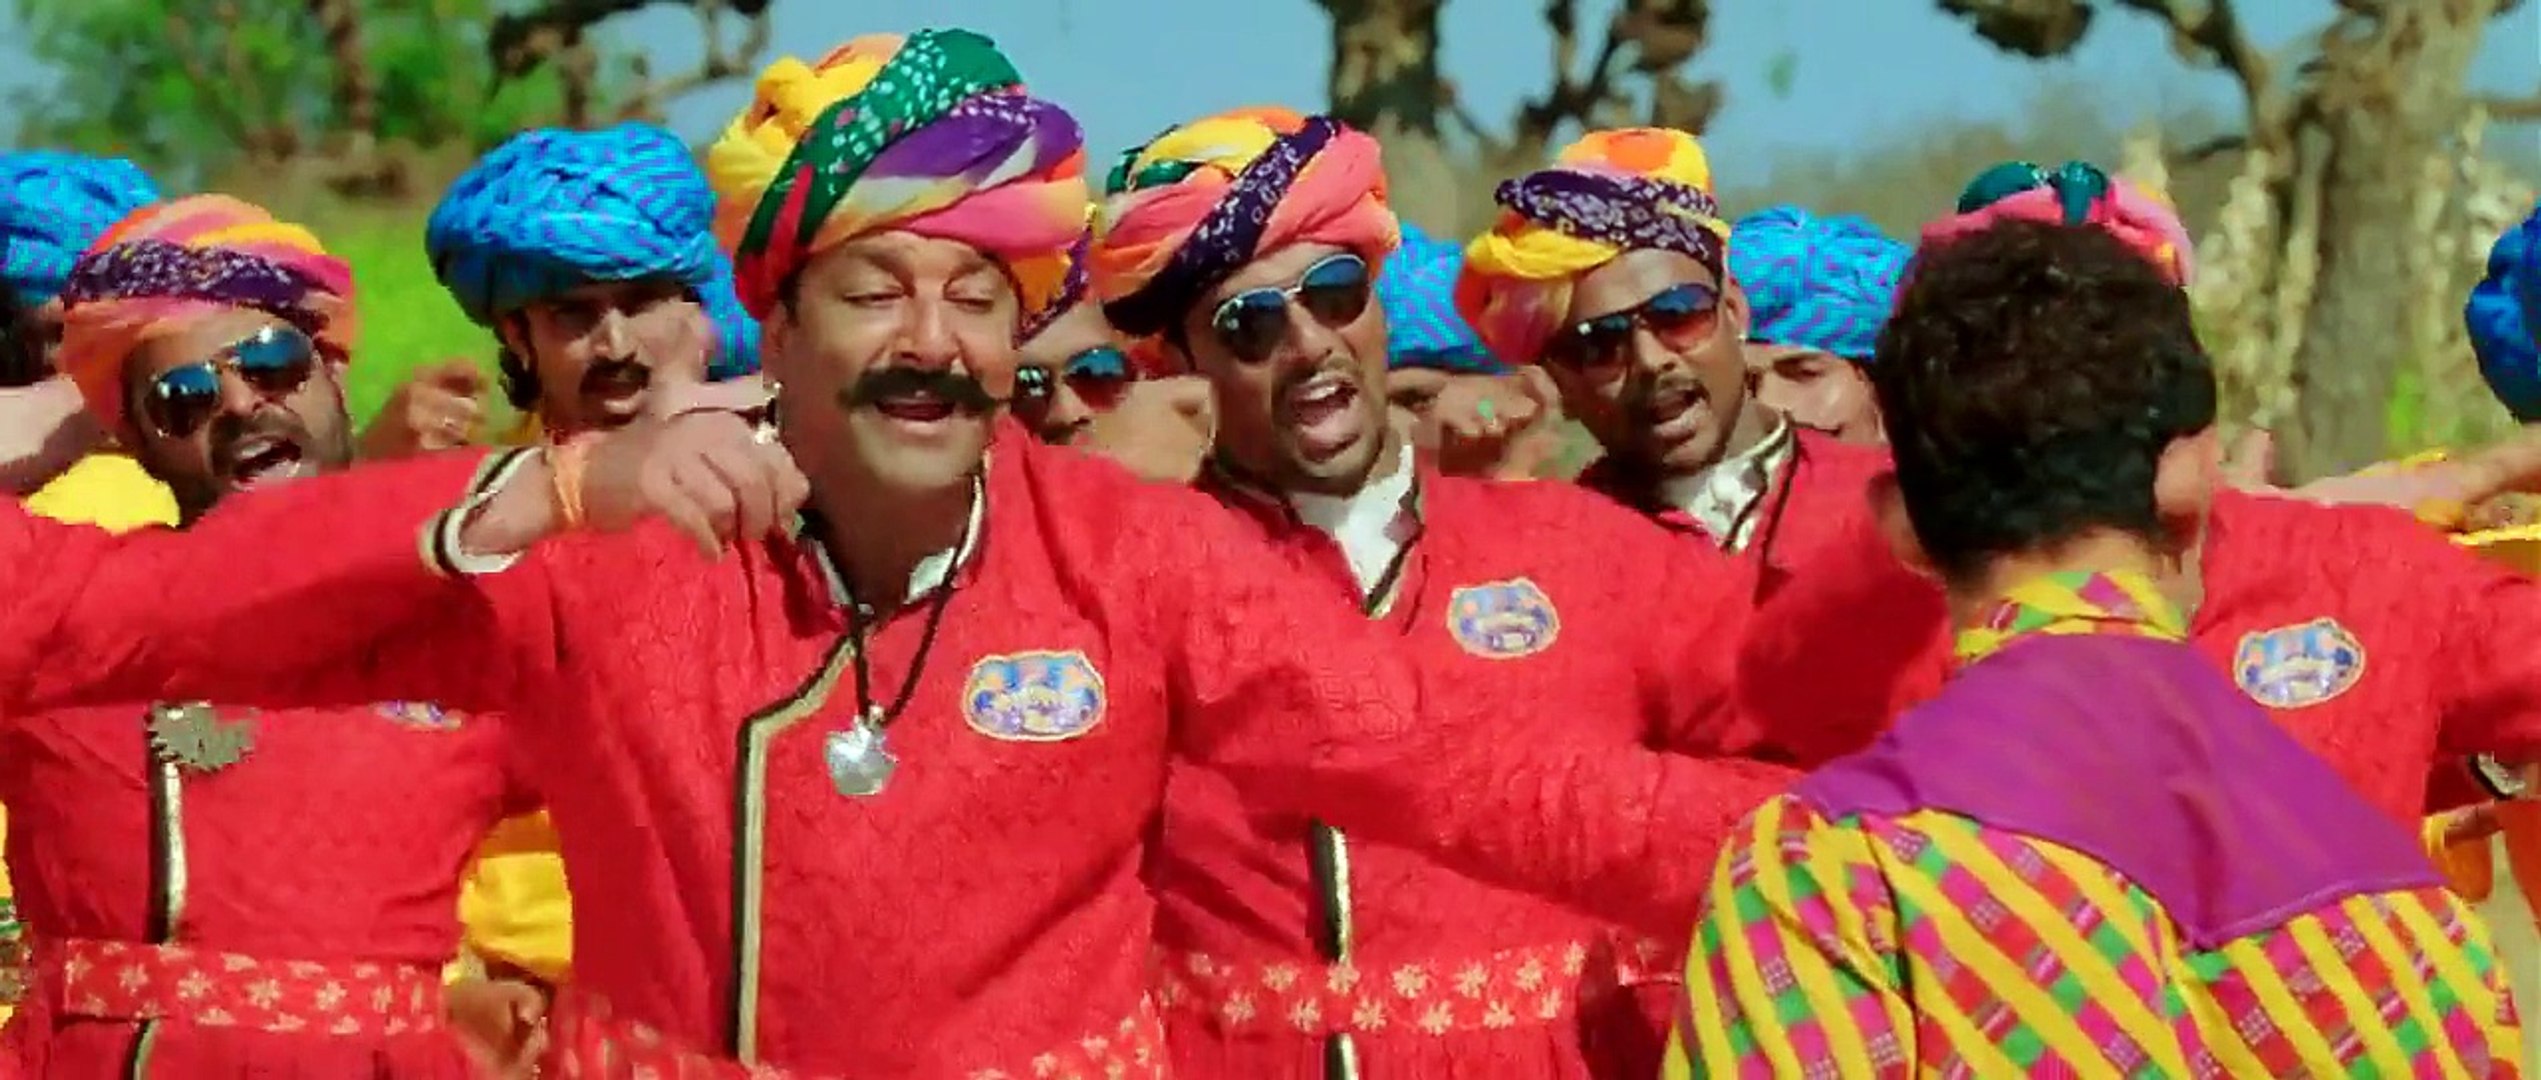 Tharki Song - The song is a fun song with the rajasthani dialect of hindi i...